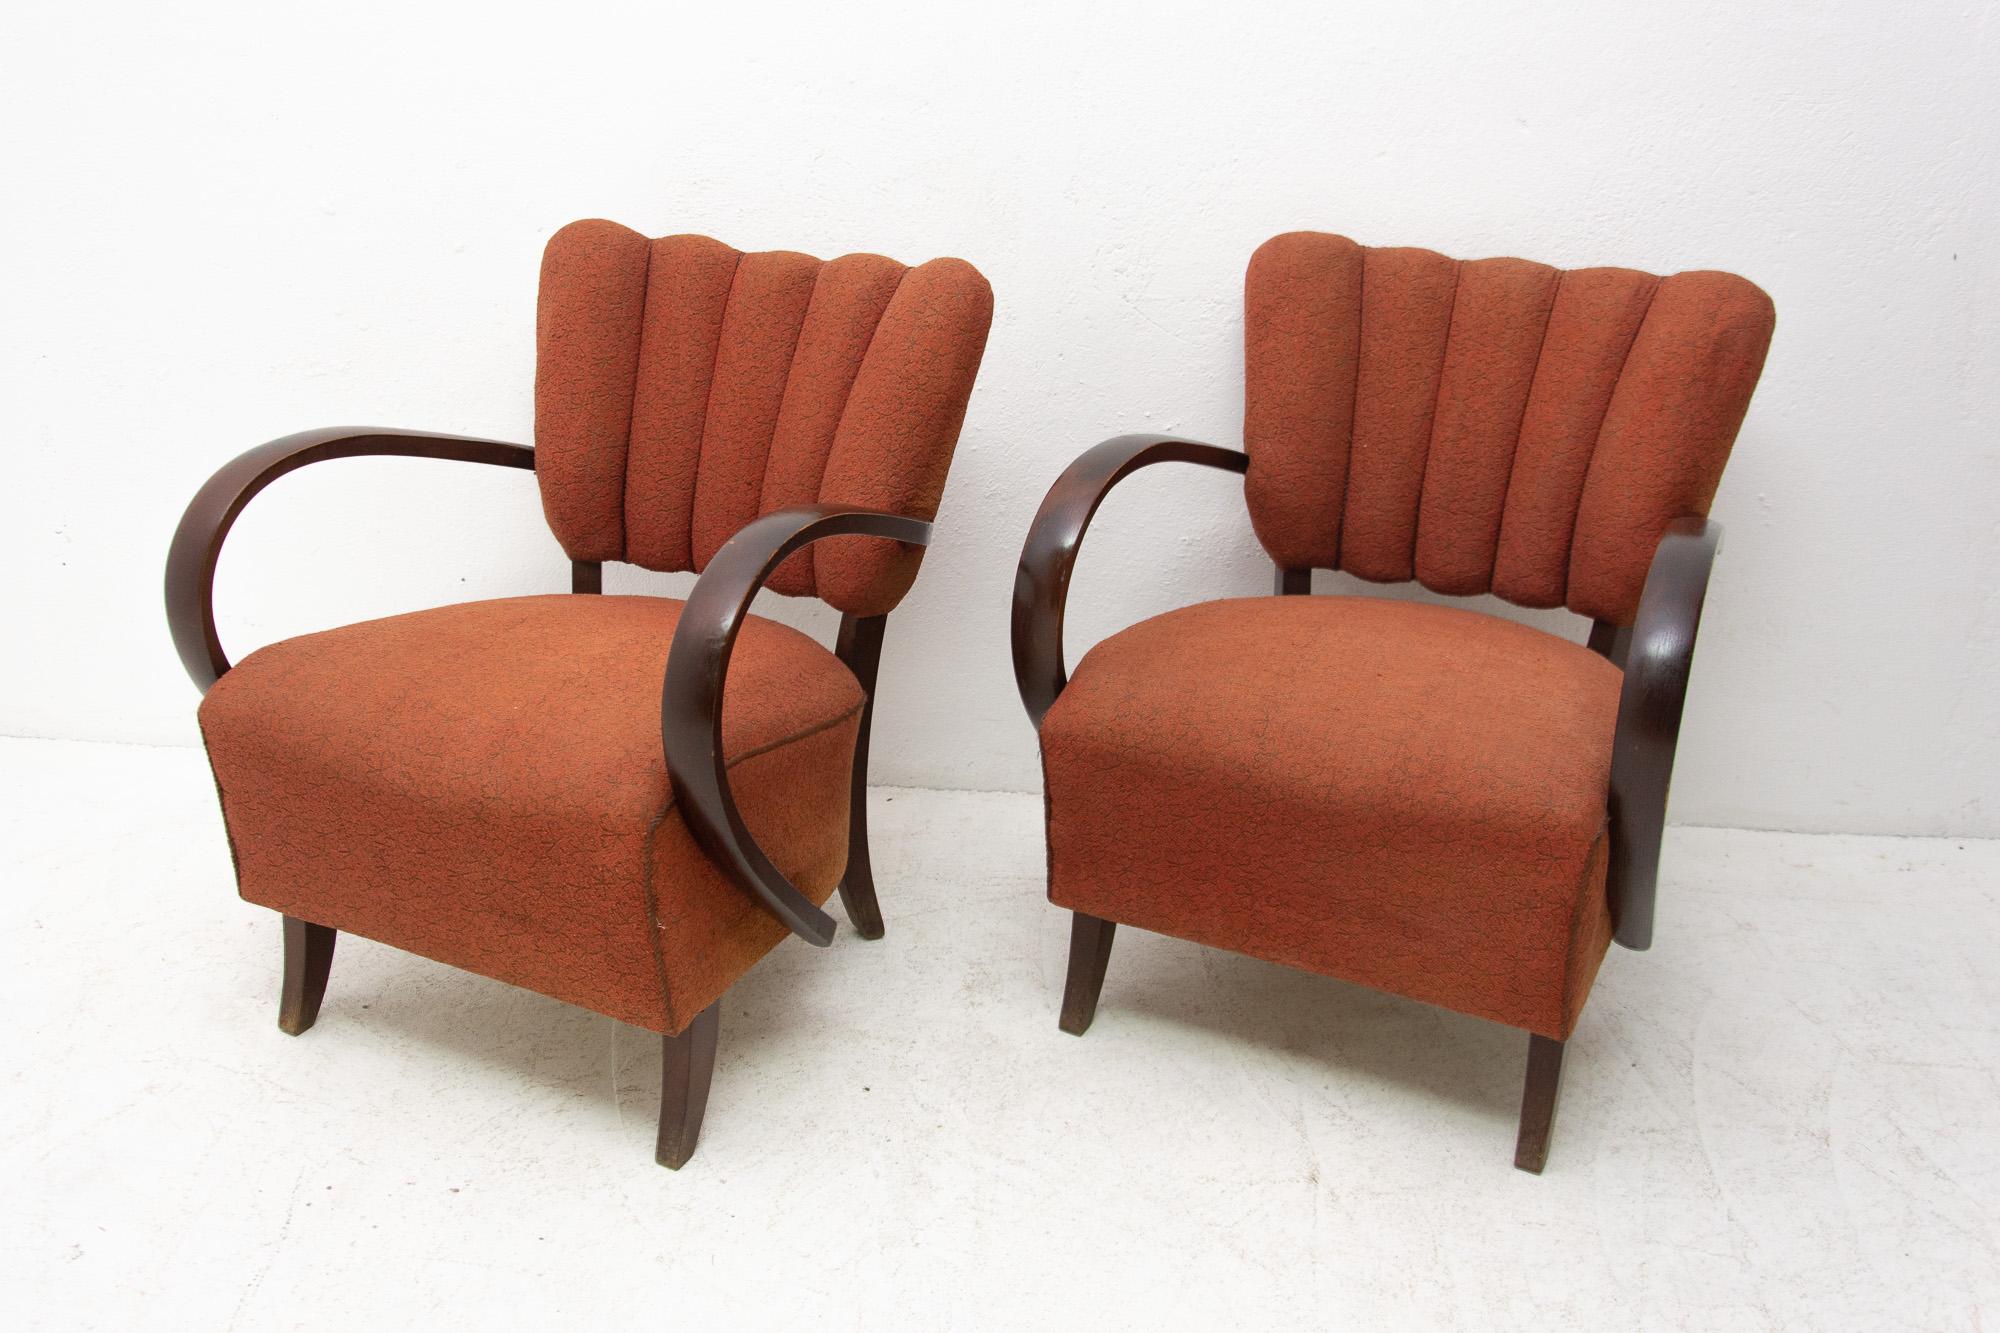 20th Century Pair of H-237 Cocktail Armchairs by Jindrich Halabala, Czechoslovakia, 1950s